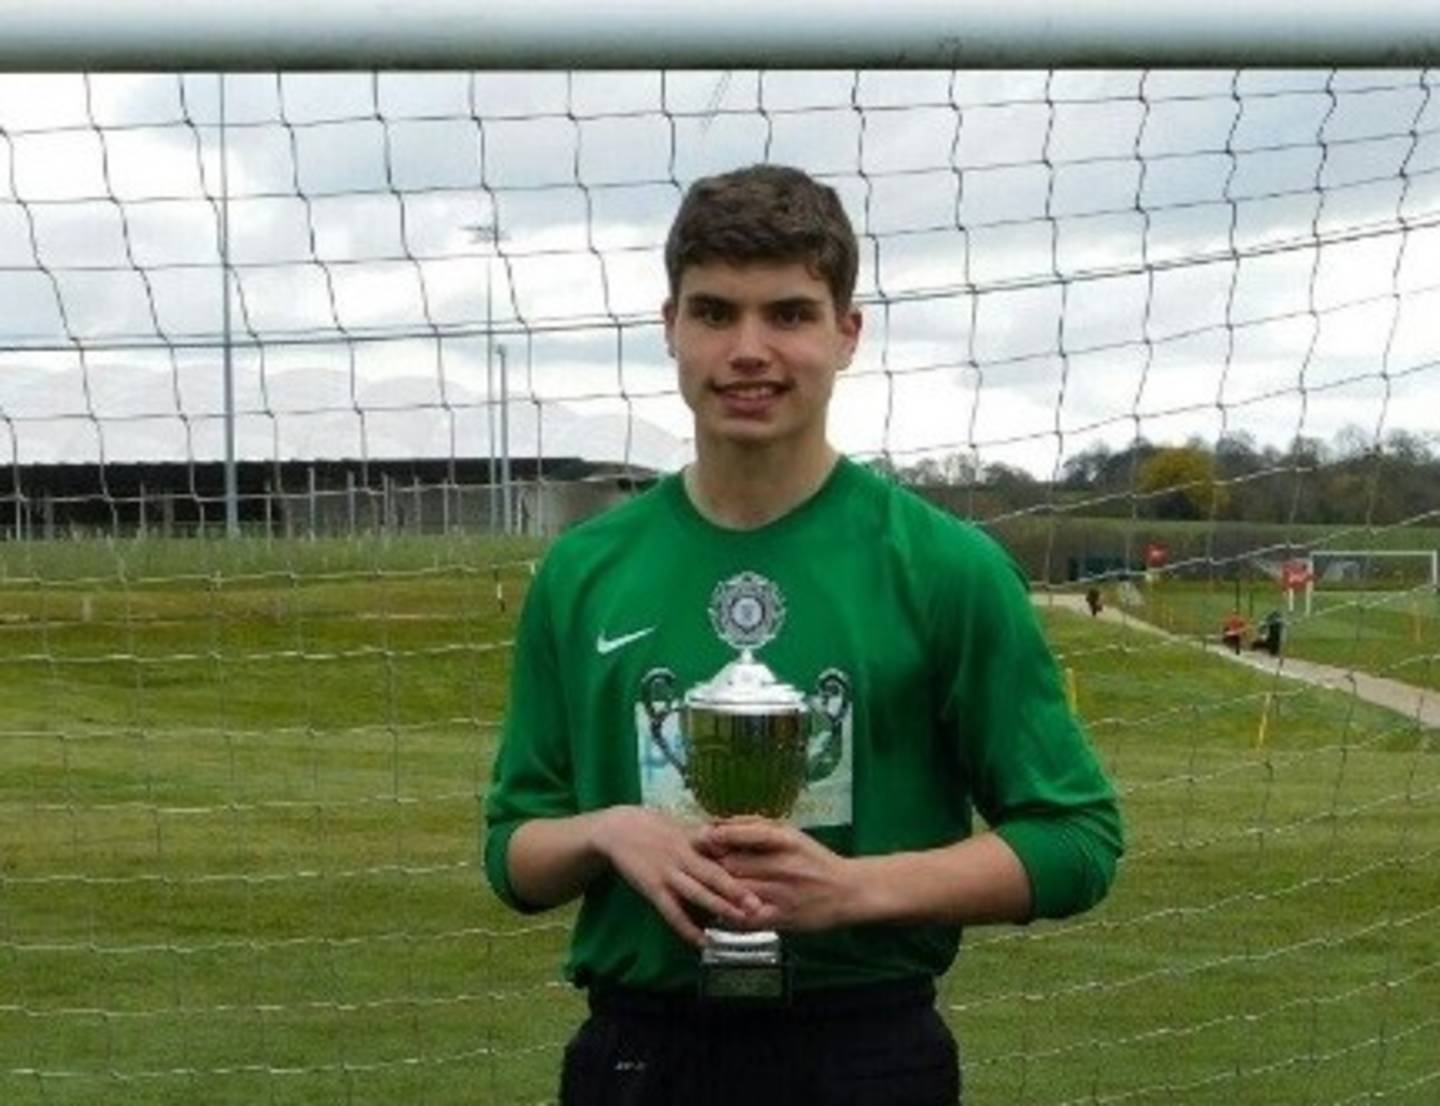 Ben Meadows in front of the net with a trophy